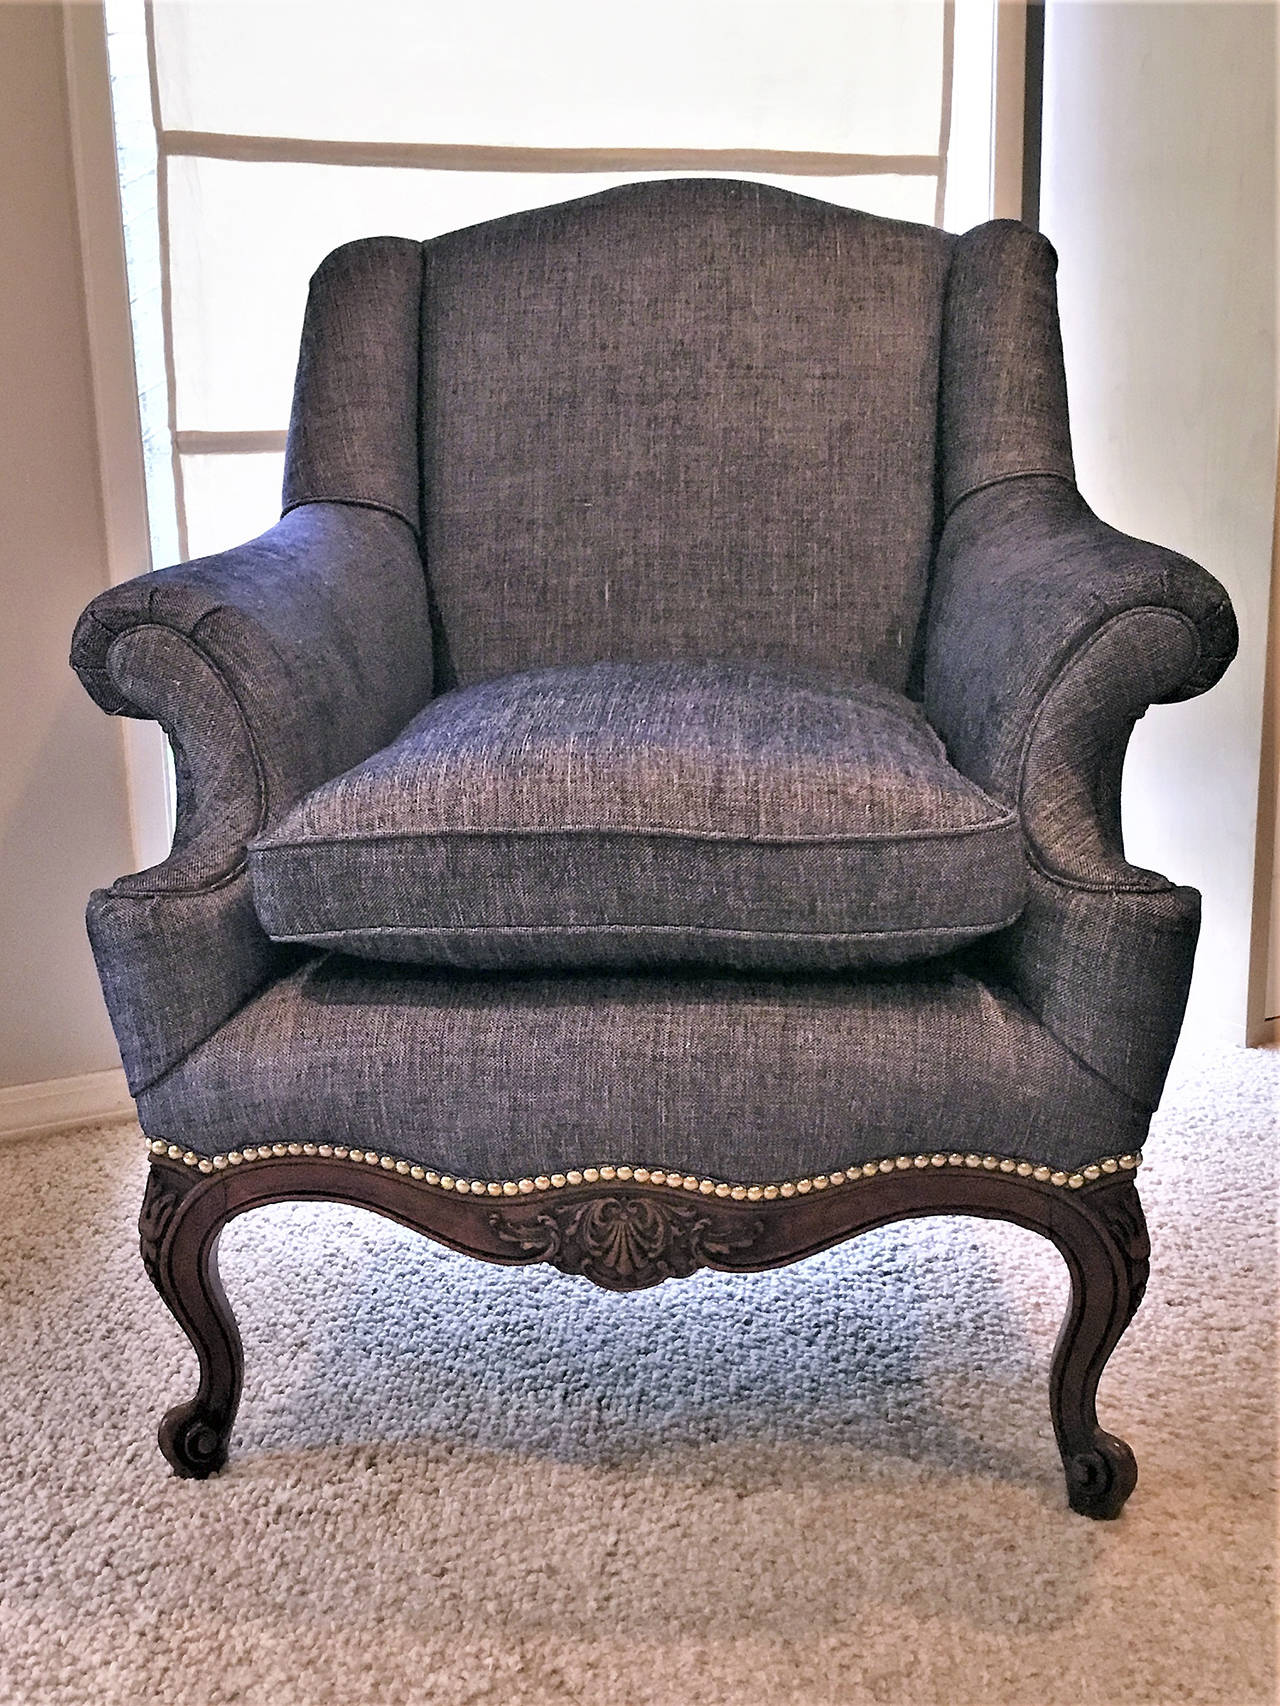 Many people have at least one piece of furniture in their home that they want to have reupholstered. This solid old chair, seen before and after, was one of those.                                Photos by Mitchell Chapman                                 For The Daily World